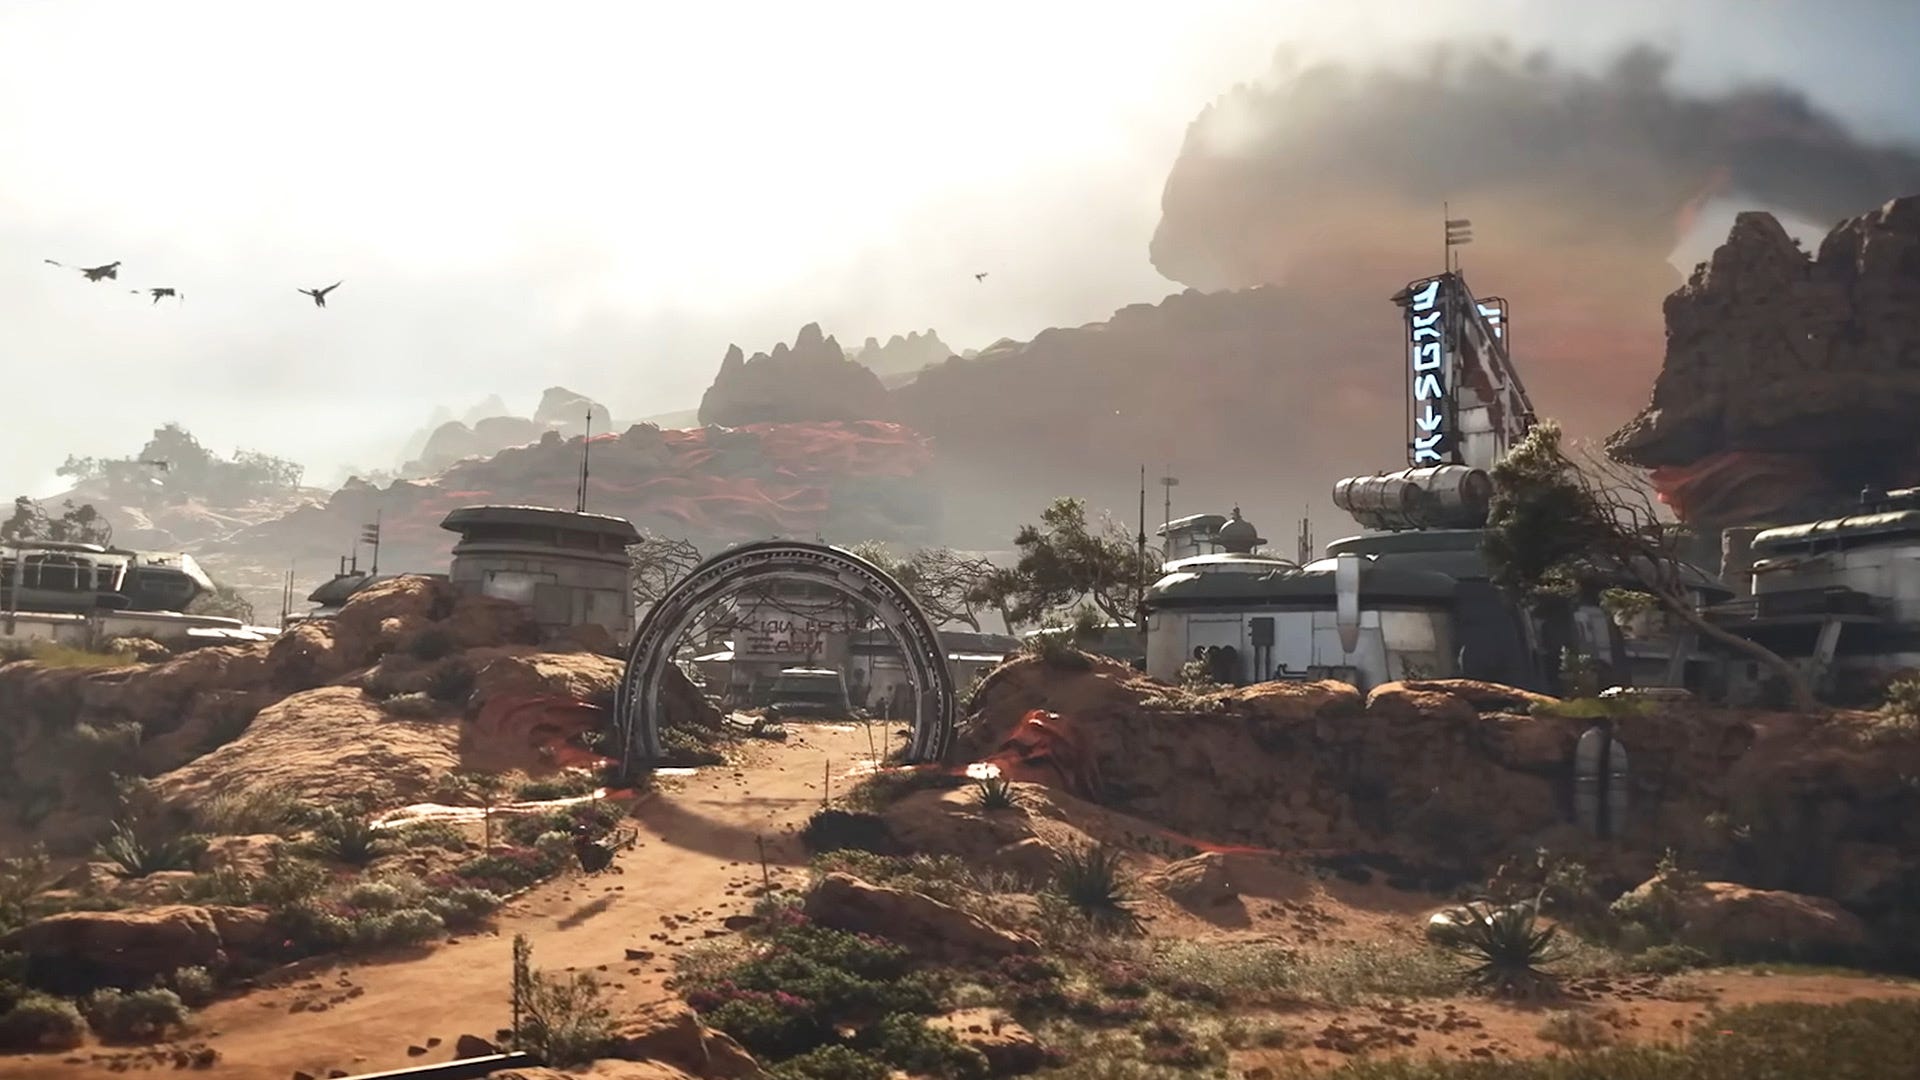 What's it like adding a world to Star Wars? The Outlaws developers explain